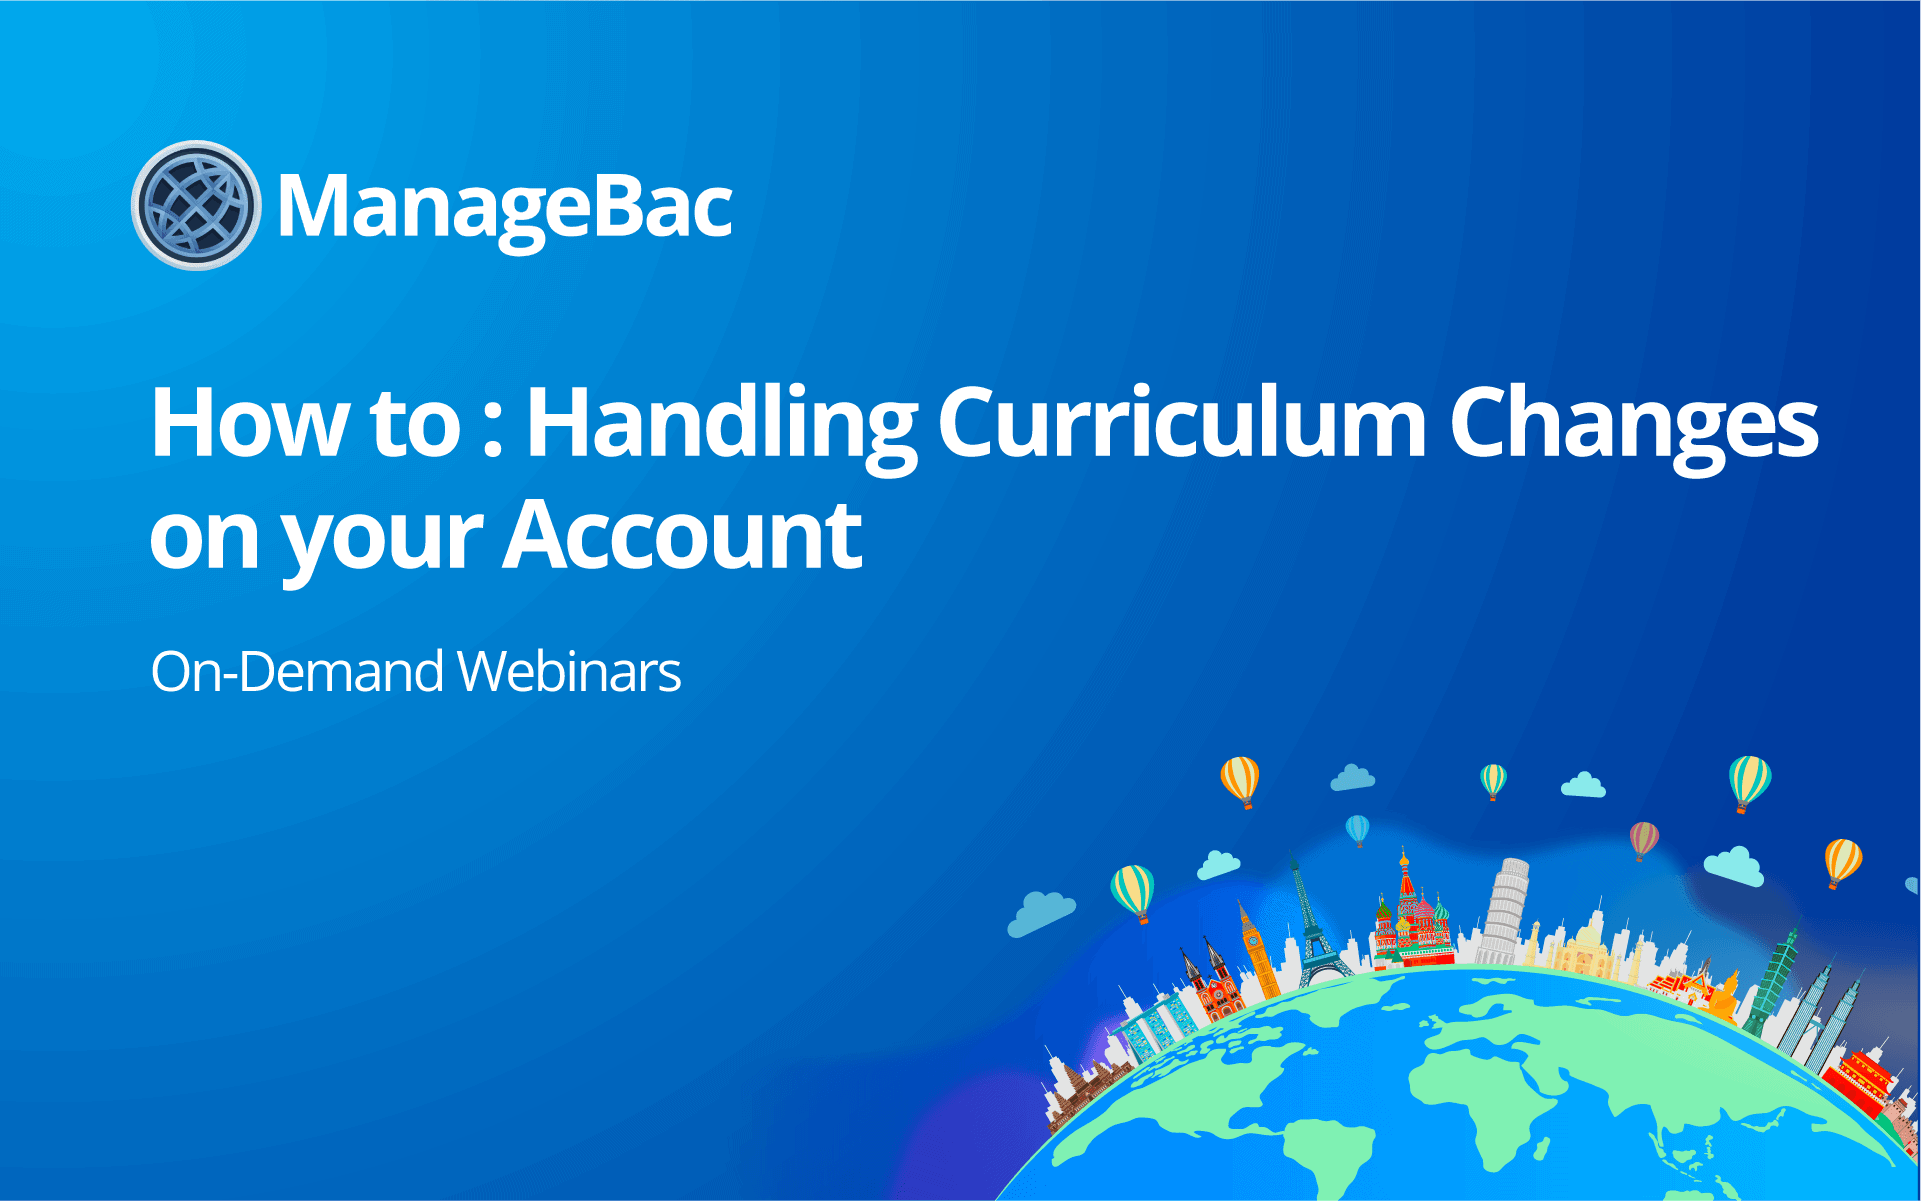 How-To: Handling Curriculum Changes on Your Account